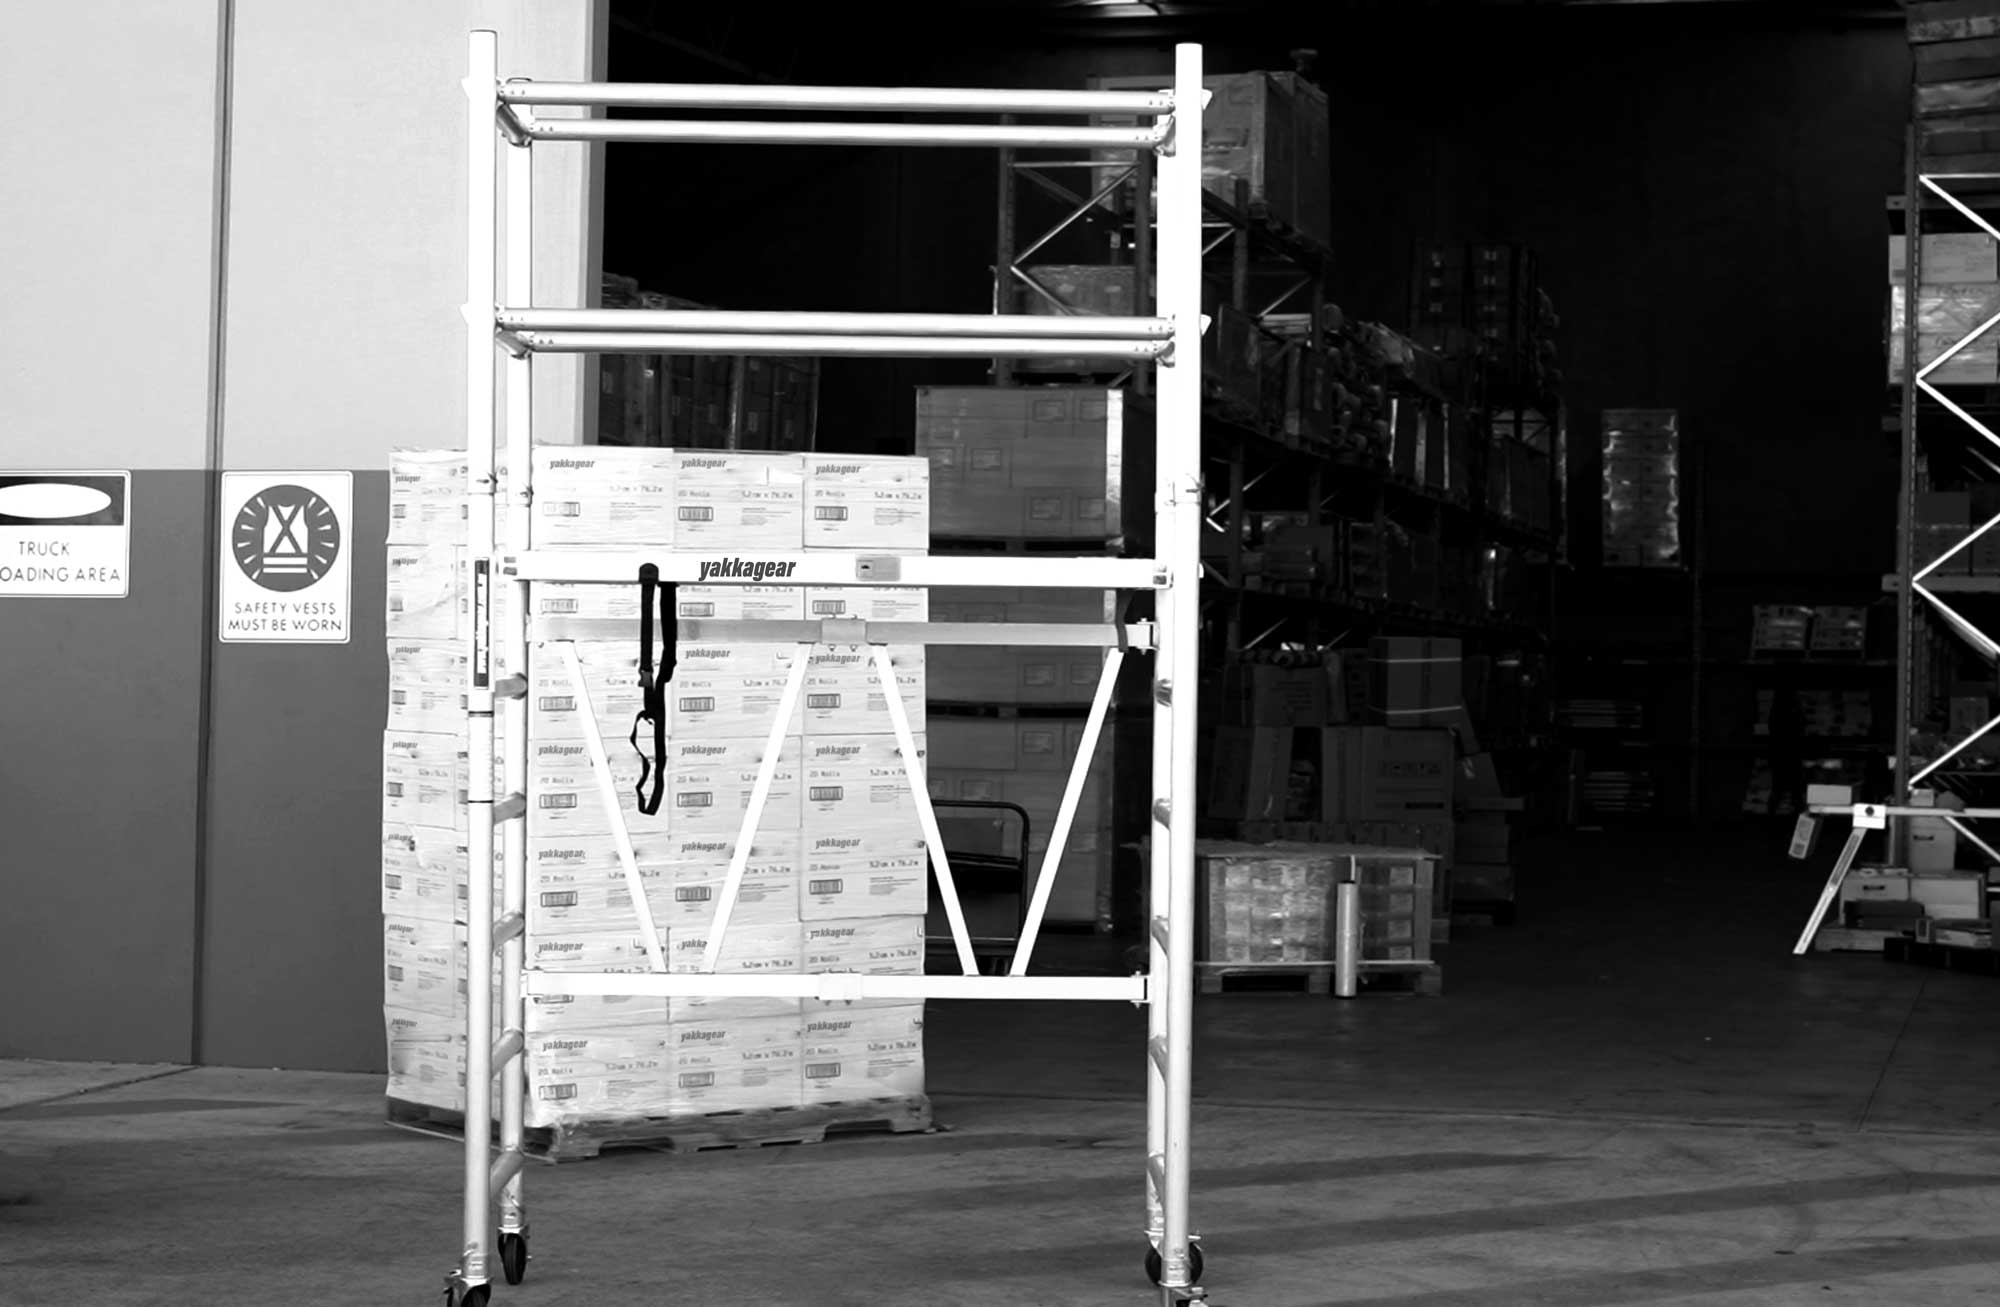 Yakka Gear Australia Base Unit and Extension Unit, 1.44m Length x 0.74m Width, with working platform height of 1.8m and reach up to 3.8m high. View from the front side angle set up in the warehouse.